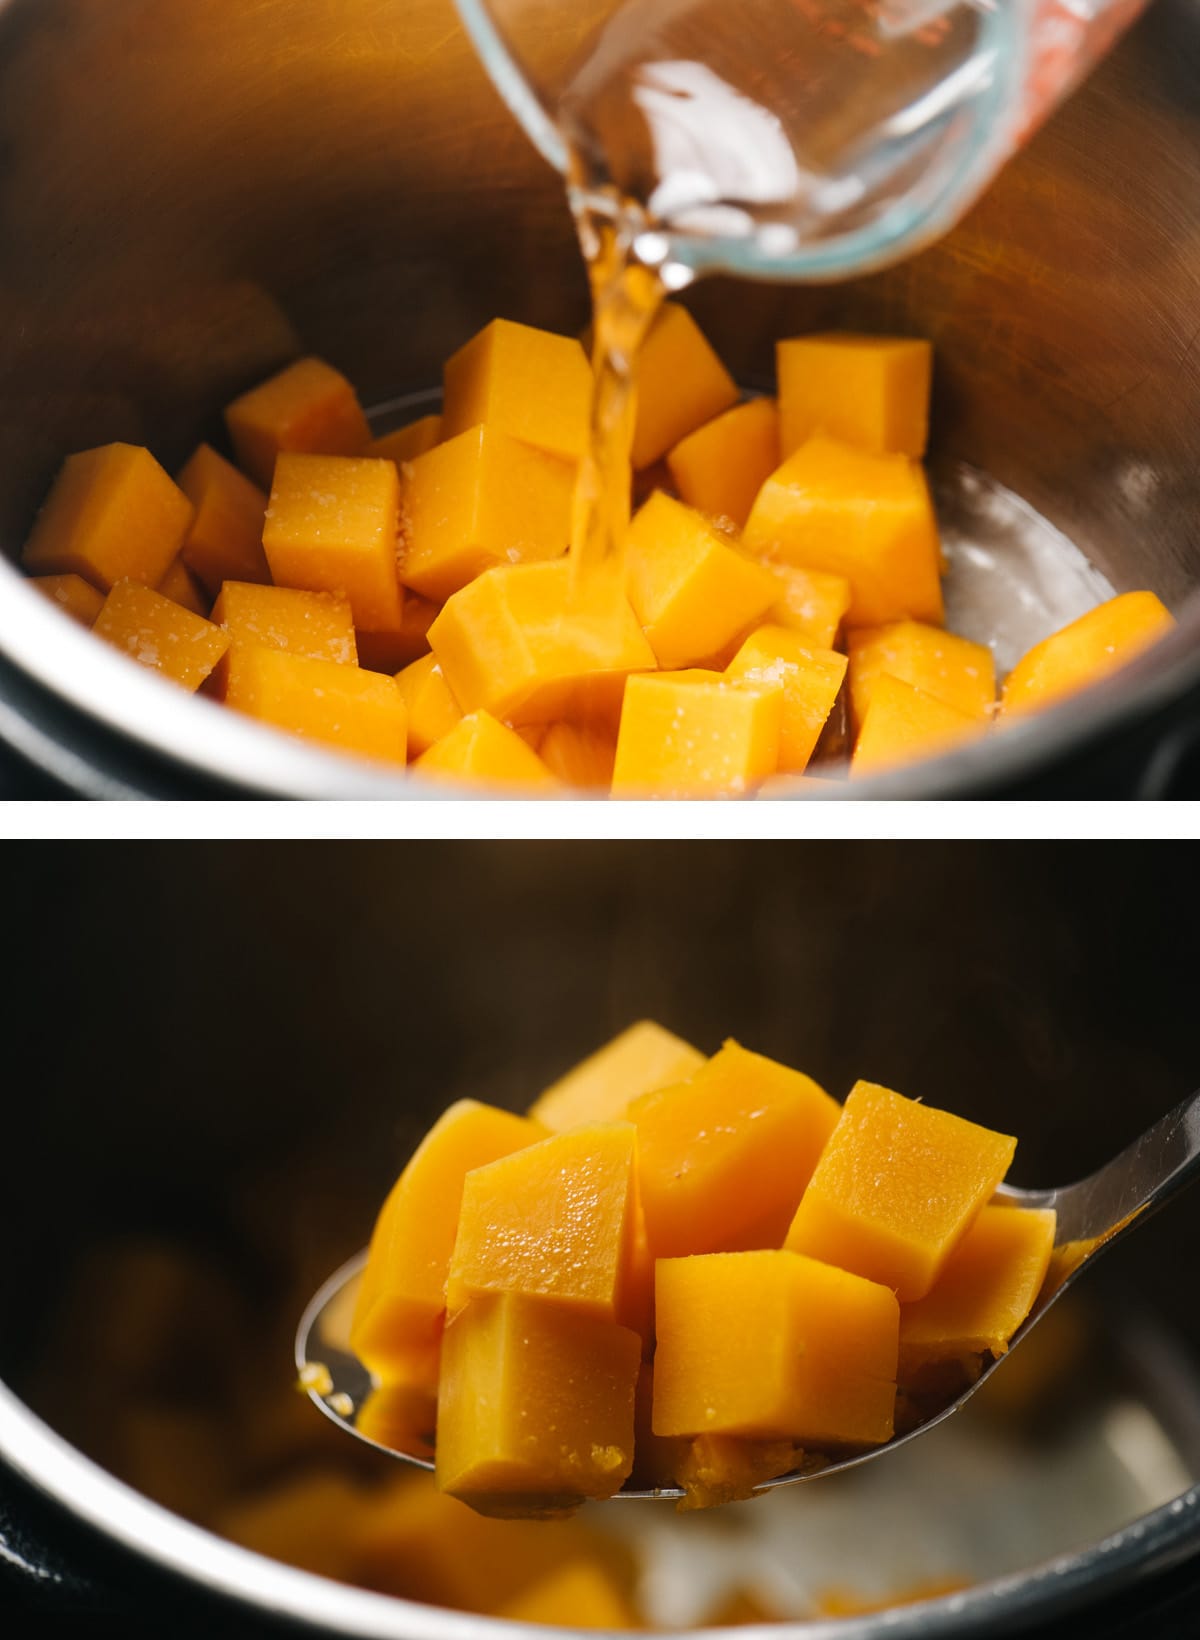 Top - pouring water over butternut squash cubes in an instant pot; bottom - instant pot steamed butternut squash cubes on a slotted spoon.